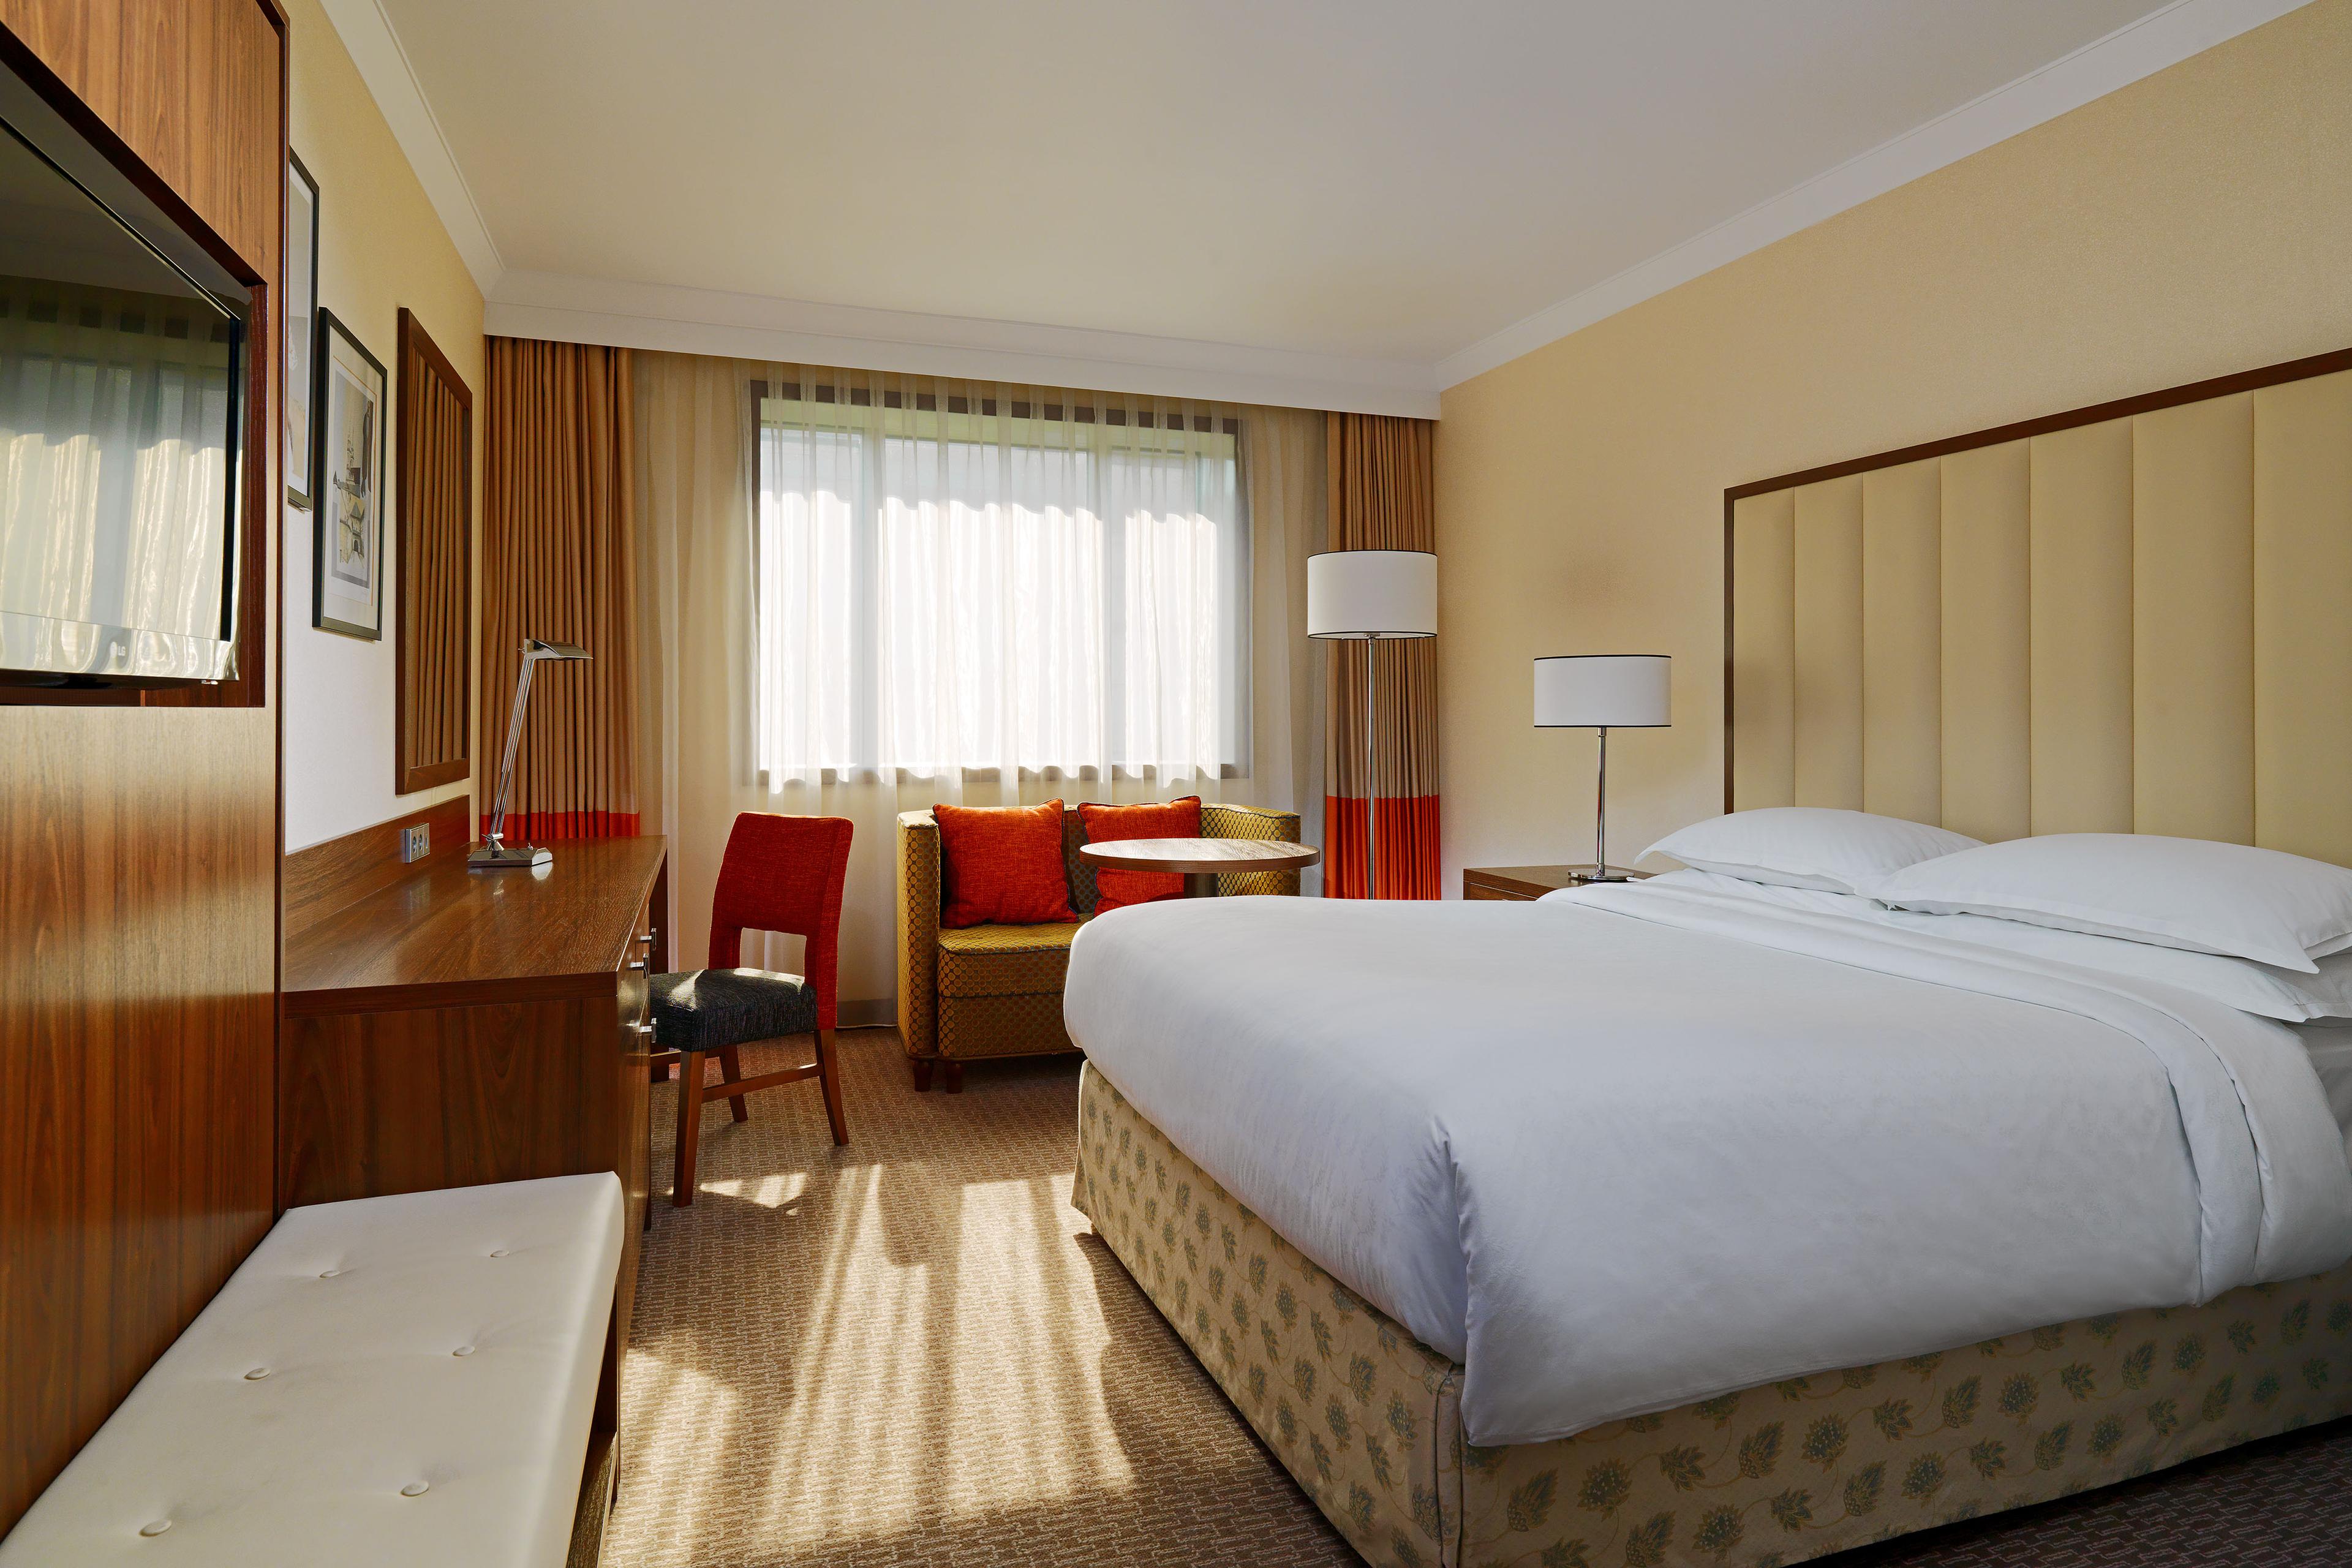 Enjoy the spacious accommodations in our Deluxe rooms, featuring Queen bed.